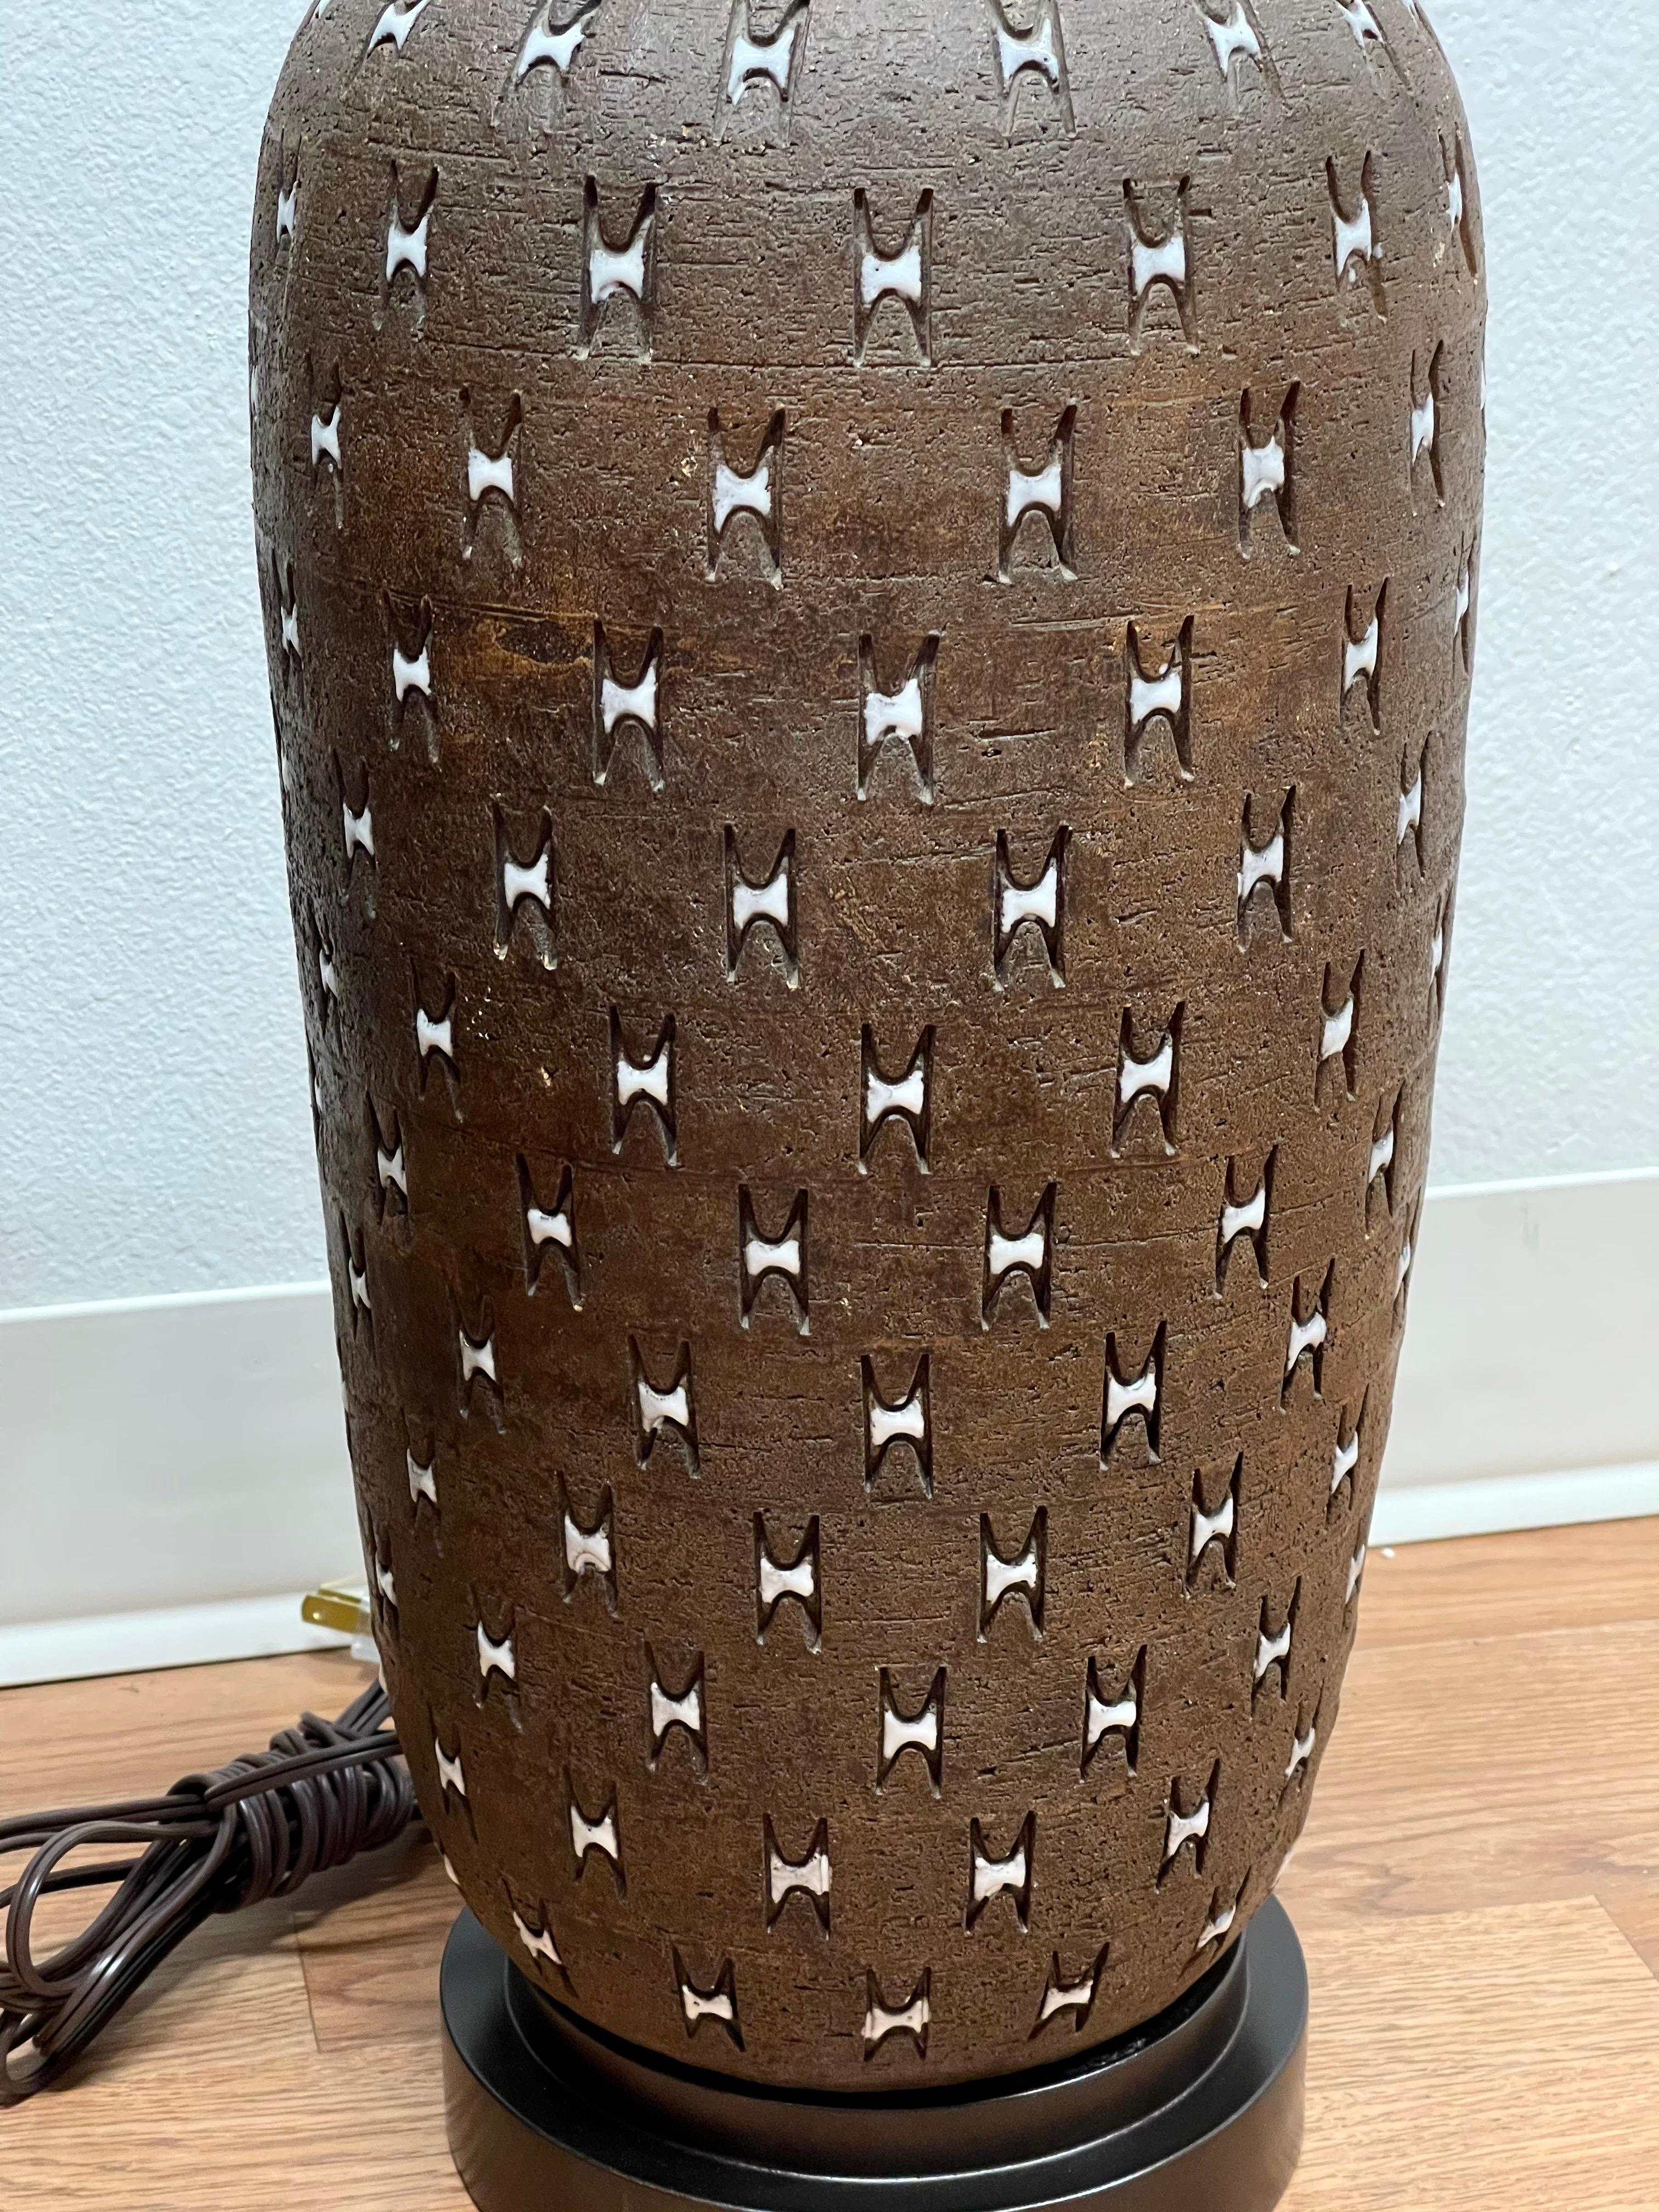 A large pottery lamp by Bitossi. Great pattern and coloring. Signed on the base made in Italy. The base we had remade and painted brown while the wiring is new as well. The pottery has some inherent glaze flaws and imperfections. Pottery itself is 1